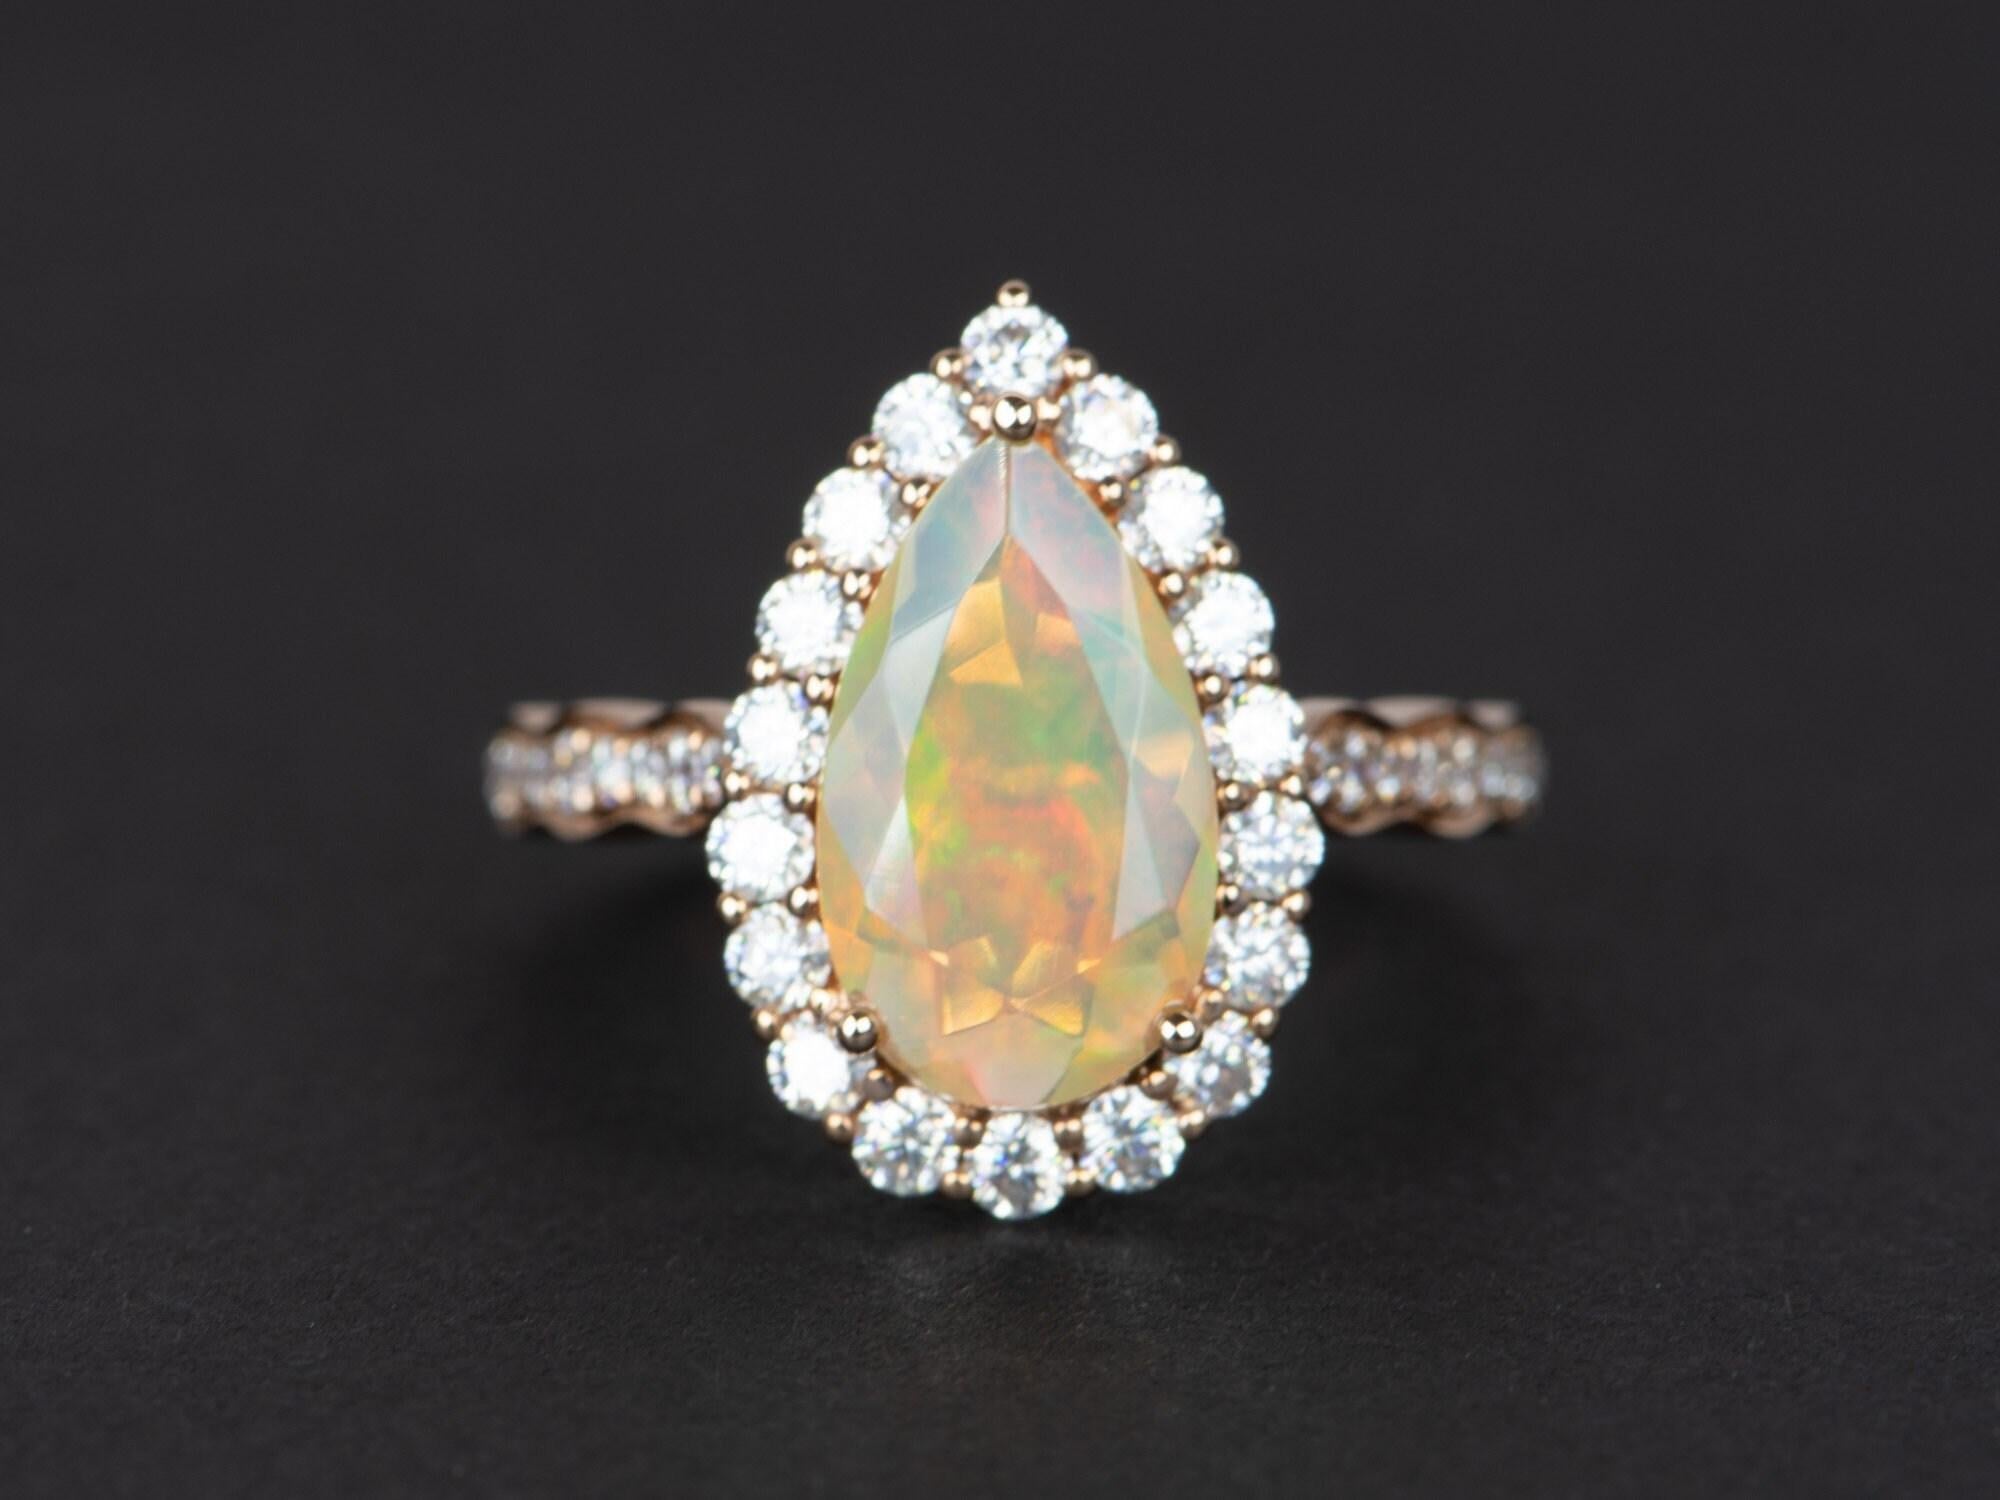 ♥  Solid 14K gold ring set with a beautiful pear-shaped Ethiopian opal in the center, flanked by a halo of bright white moissanites. The shank is also decorated with gradual-sized moissanites for maximum sparkle!
♥  The opal is incredibly fiery with